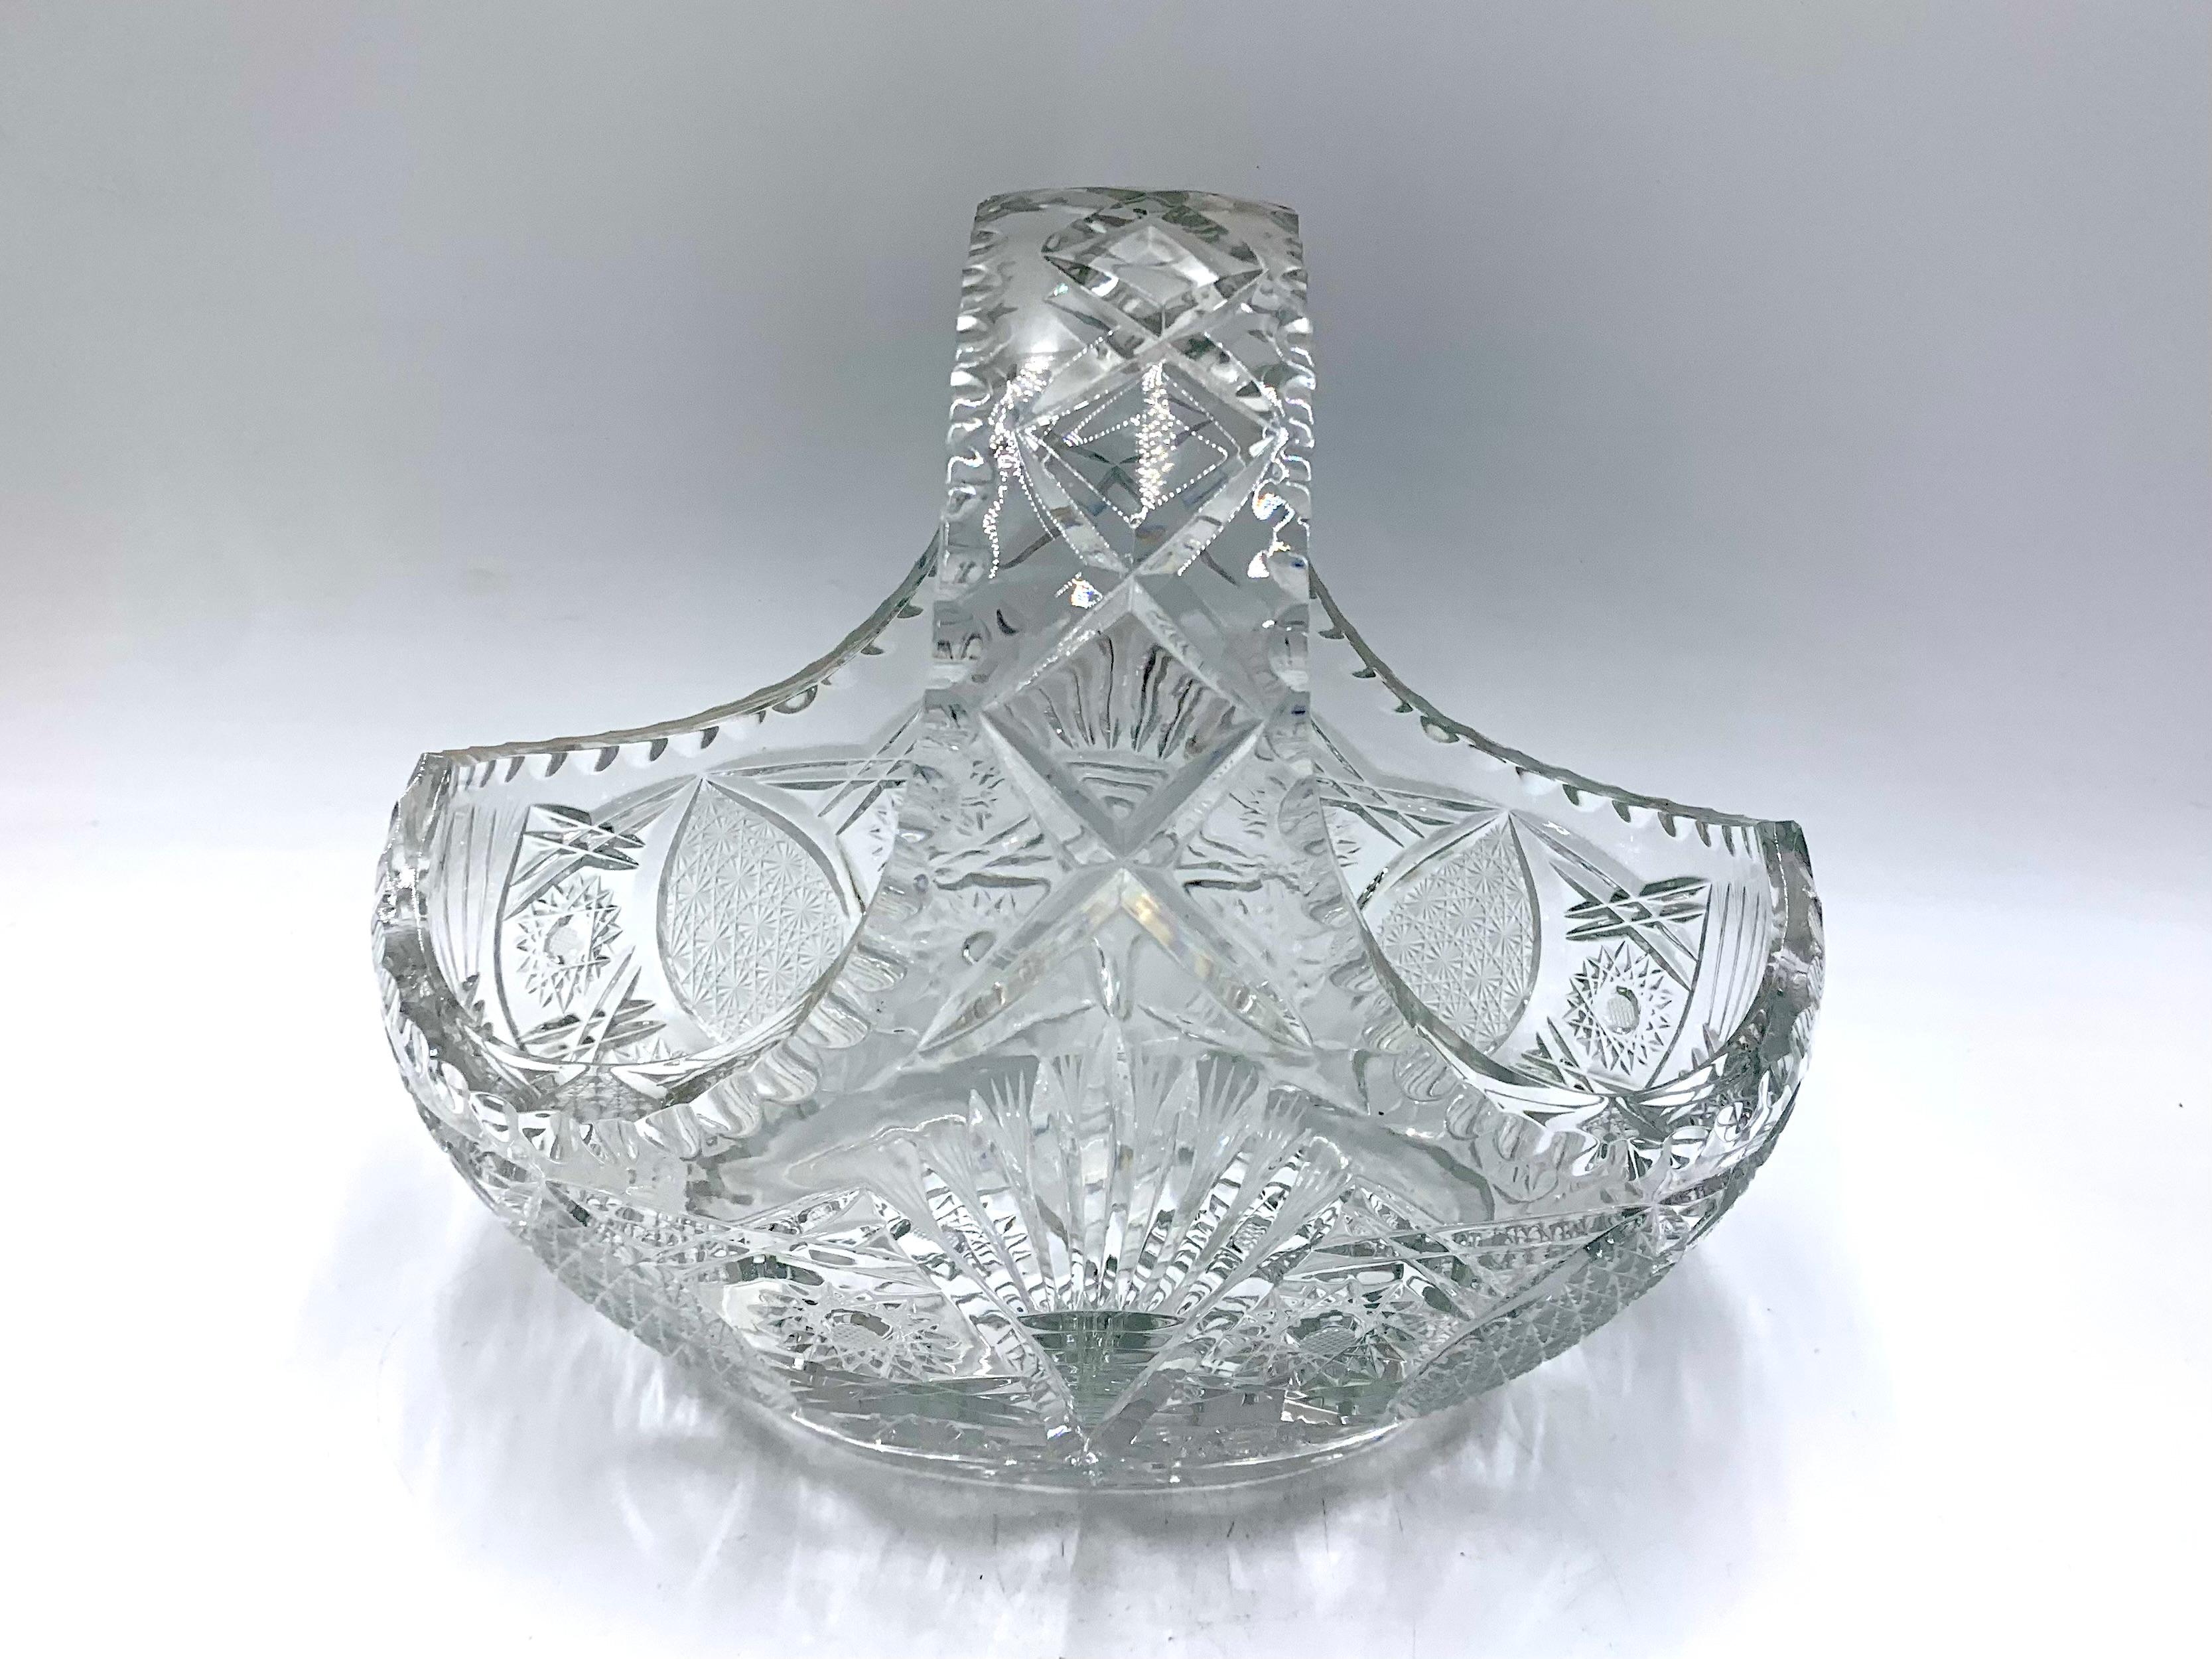 Big clear crystal decorative basket - a bowl.
For sweets or fruits.
Very good condition, very heavy. 
No damage.